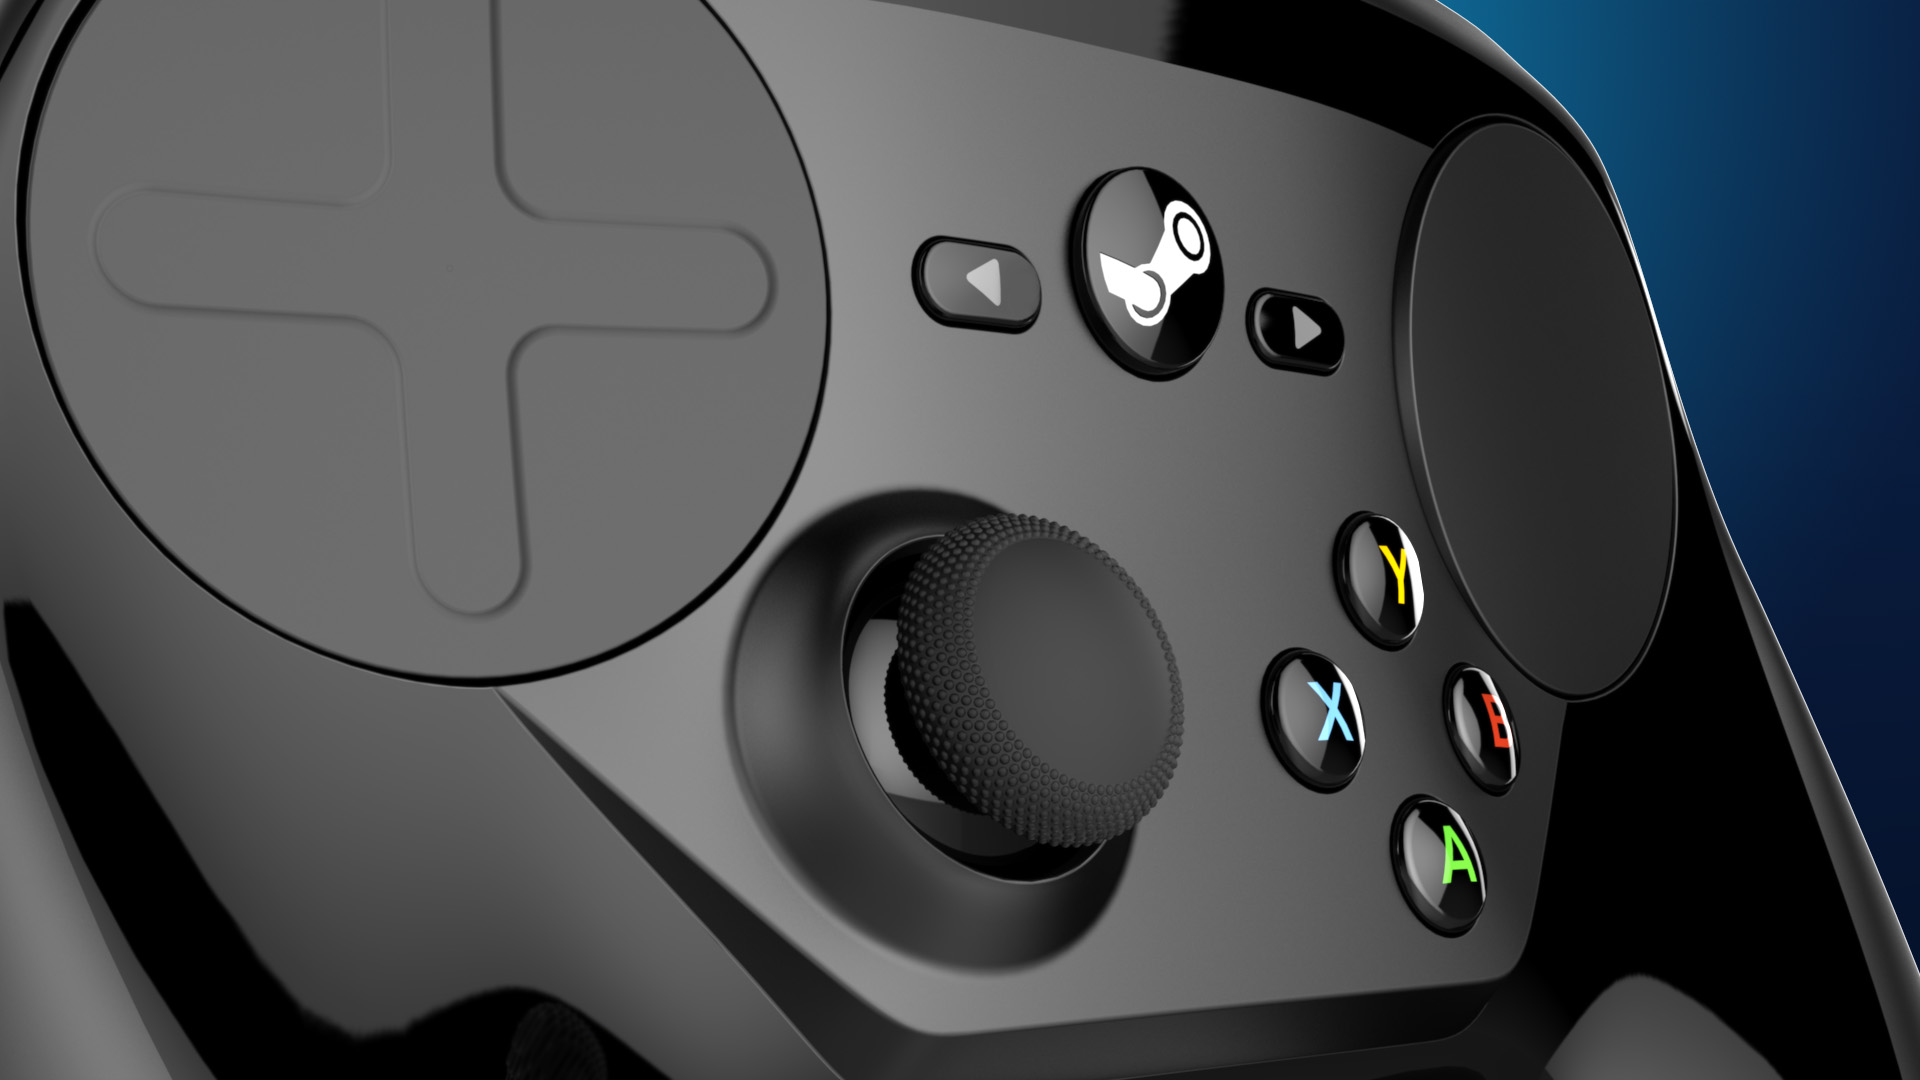 PlayStation and Xbox controllers most popular among Steam gamers